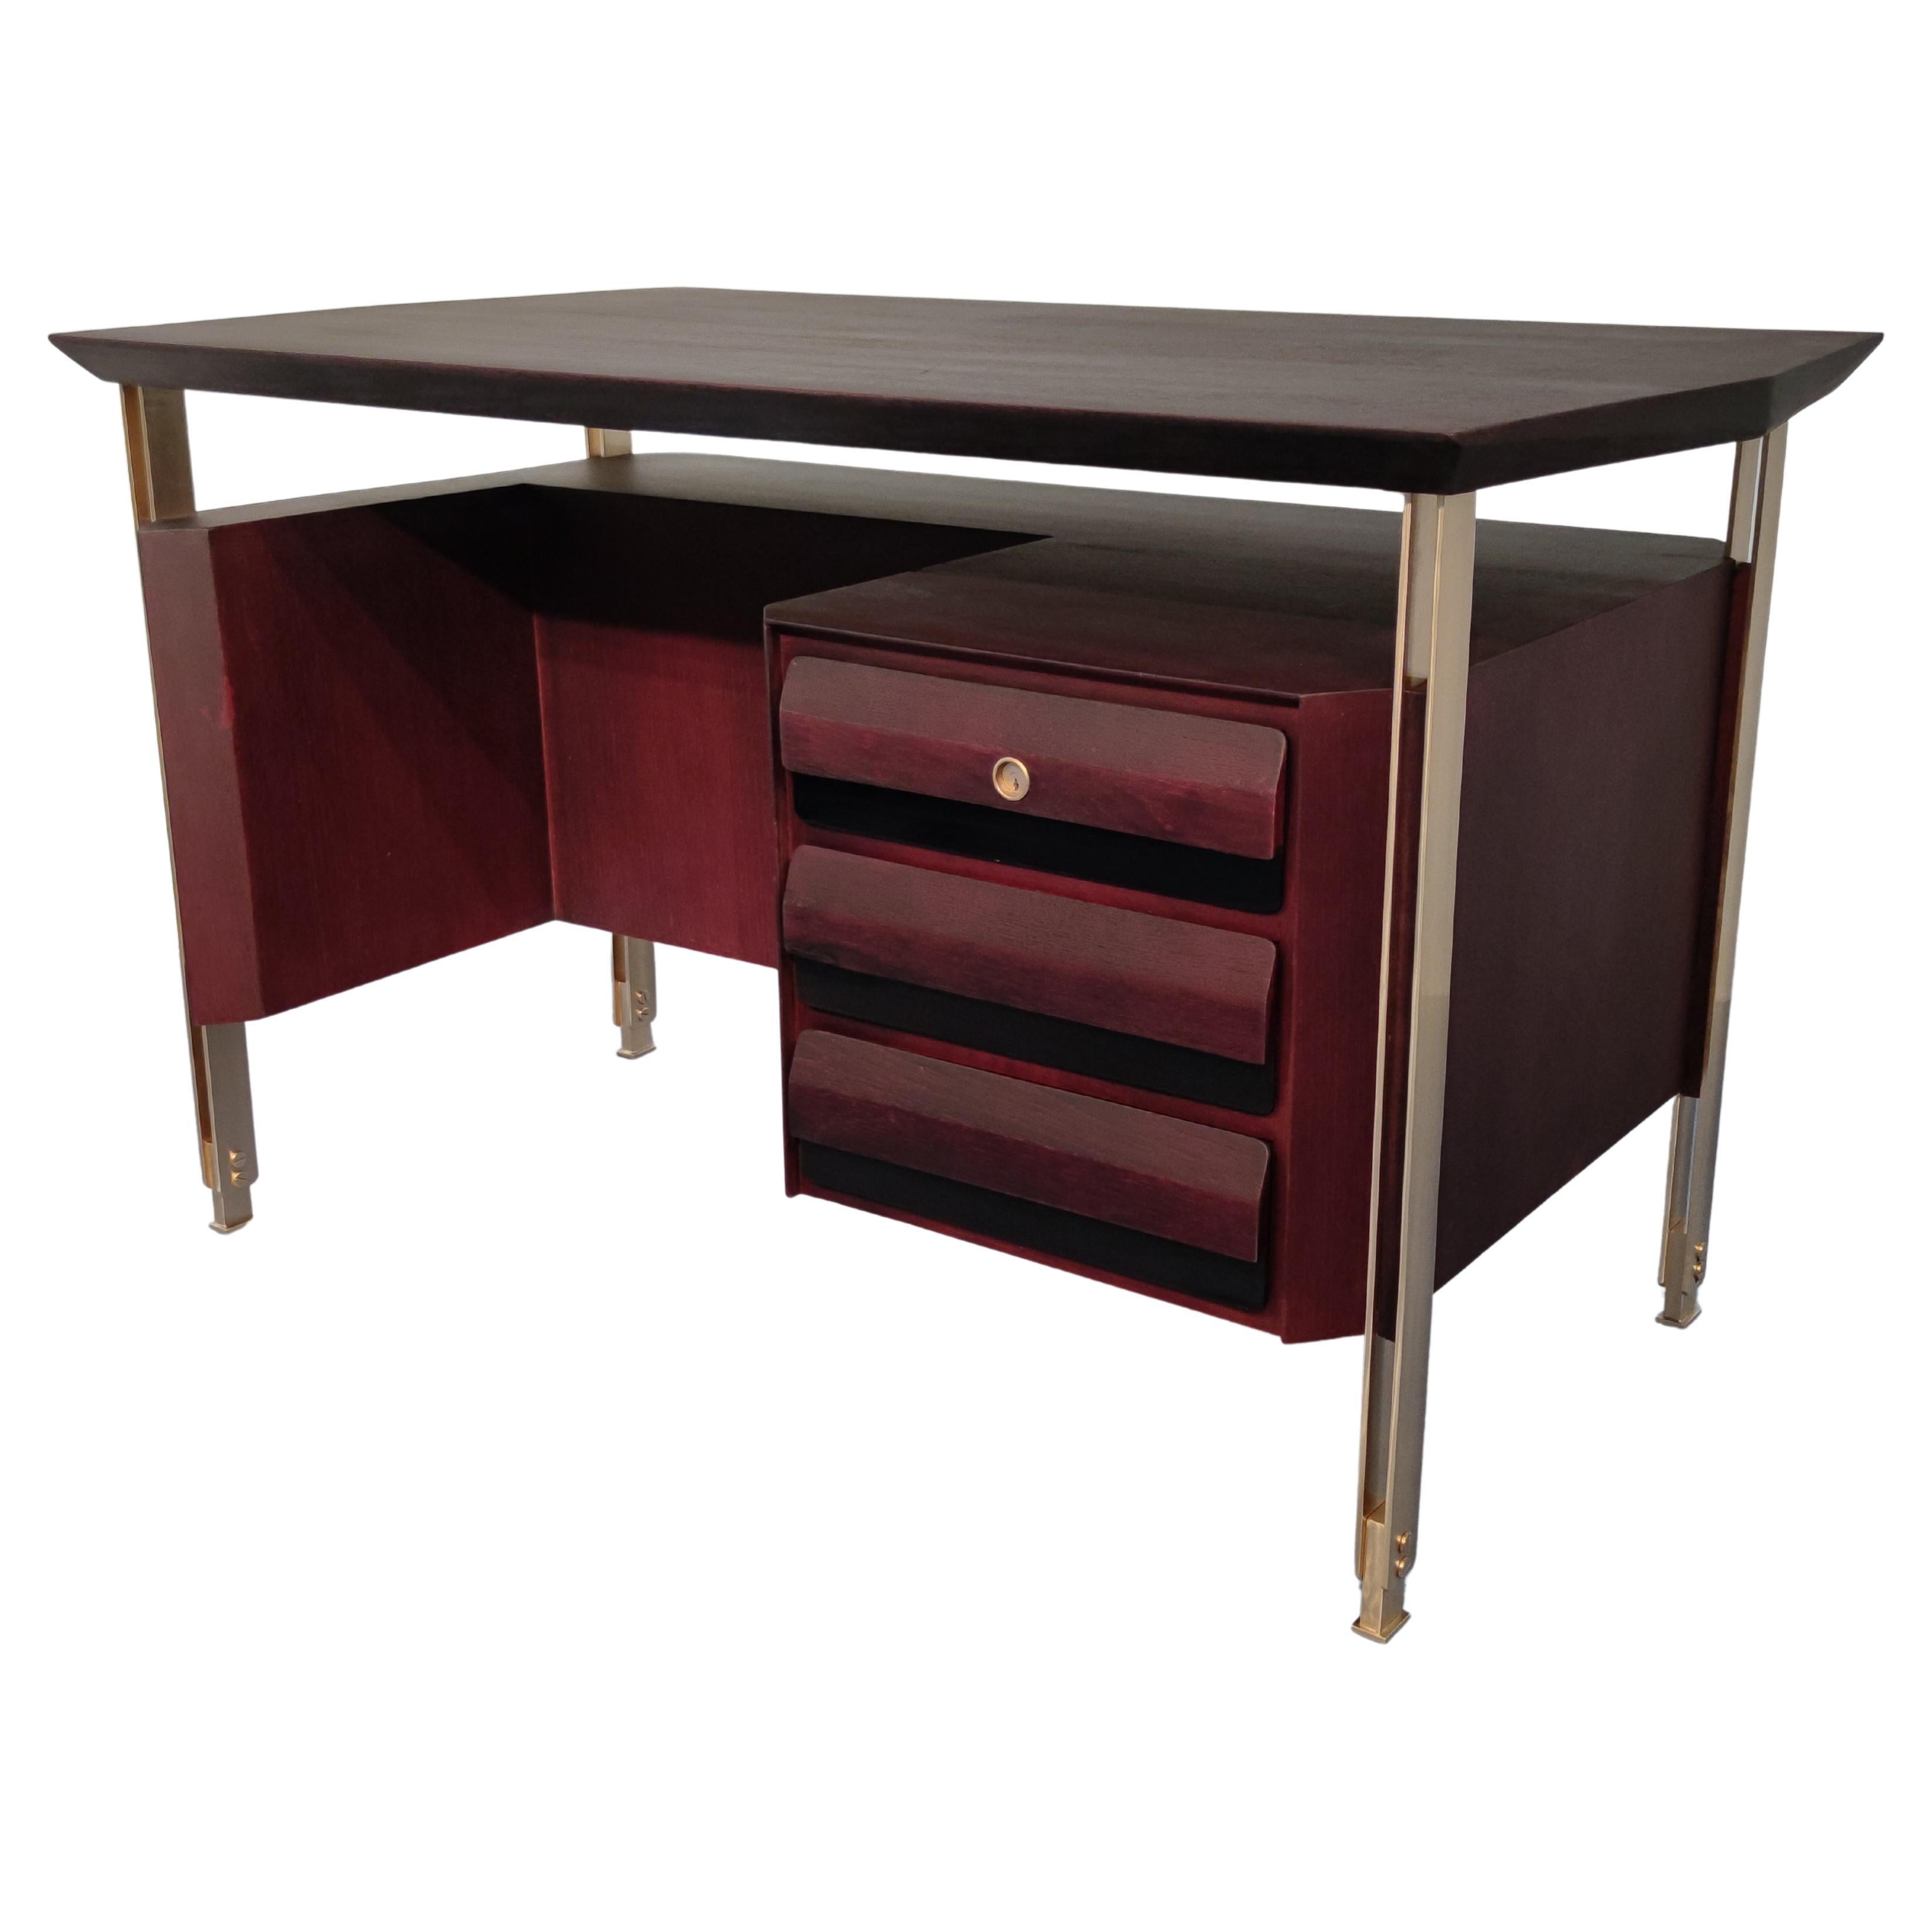 Stylish Italian Mid-Century Modern executive desk in bordeaux color designed by Vittorio Dassi in the 1960s. Hexagonal top shape, the double brass bar support with high adjustable legs has a really unique design. The three drawers with the final